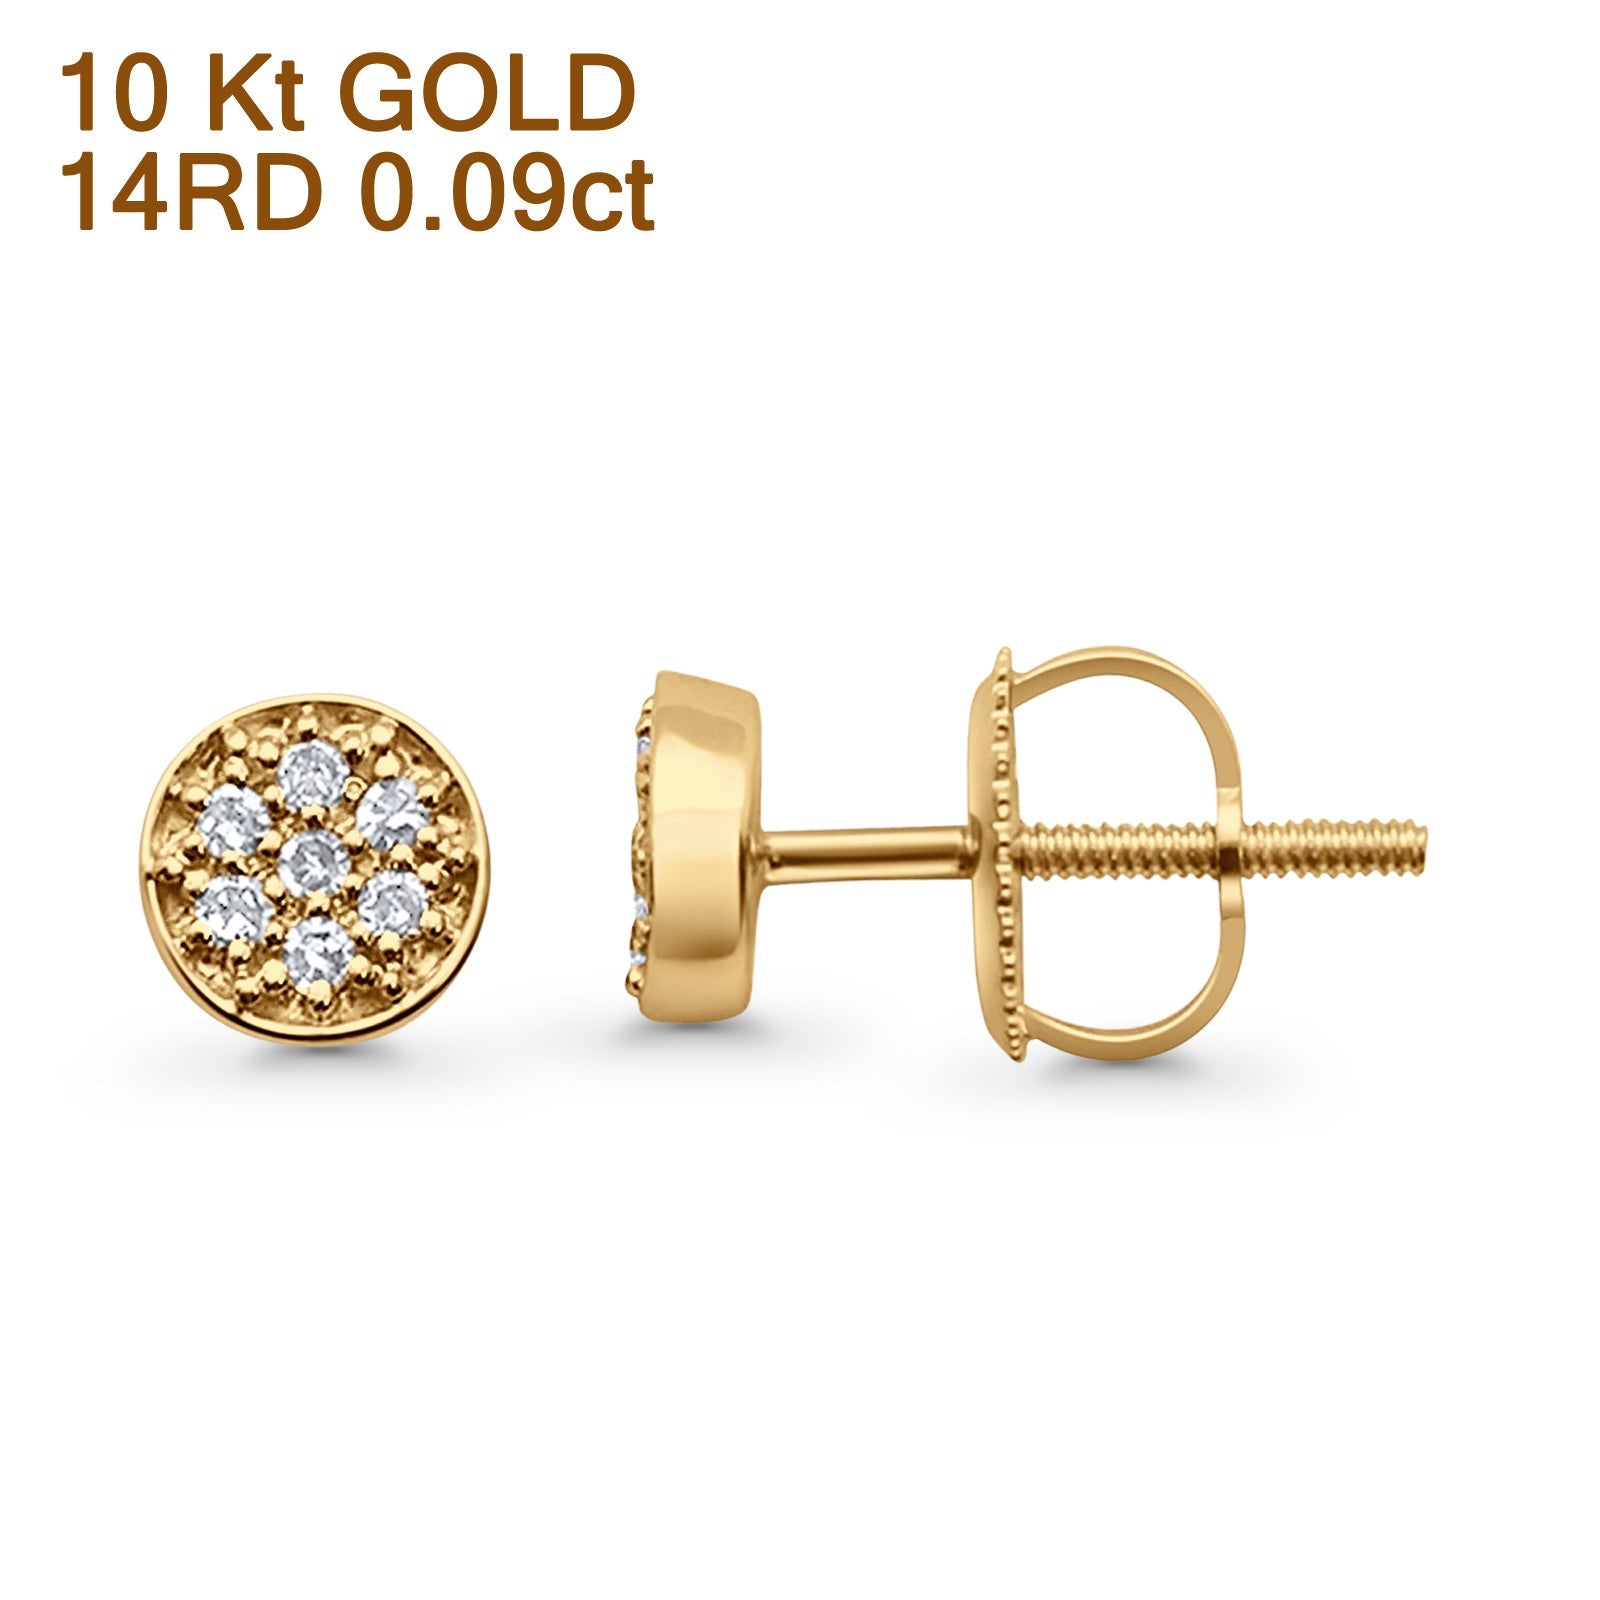 Solid 10K Gold 5.3mm Round Shaped Cluster Diamond Stud Earring